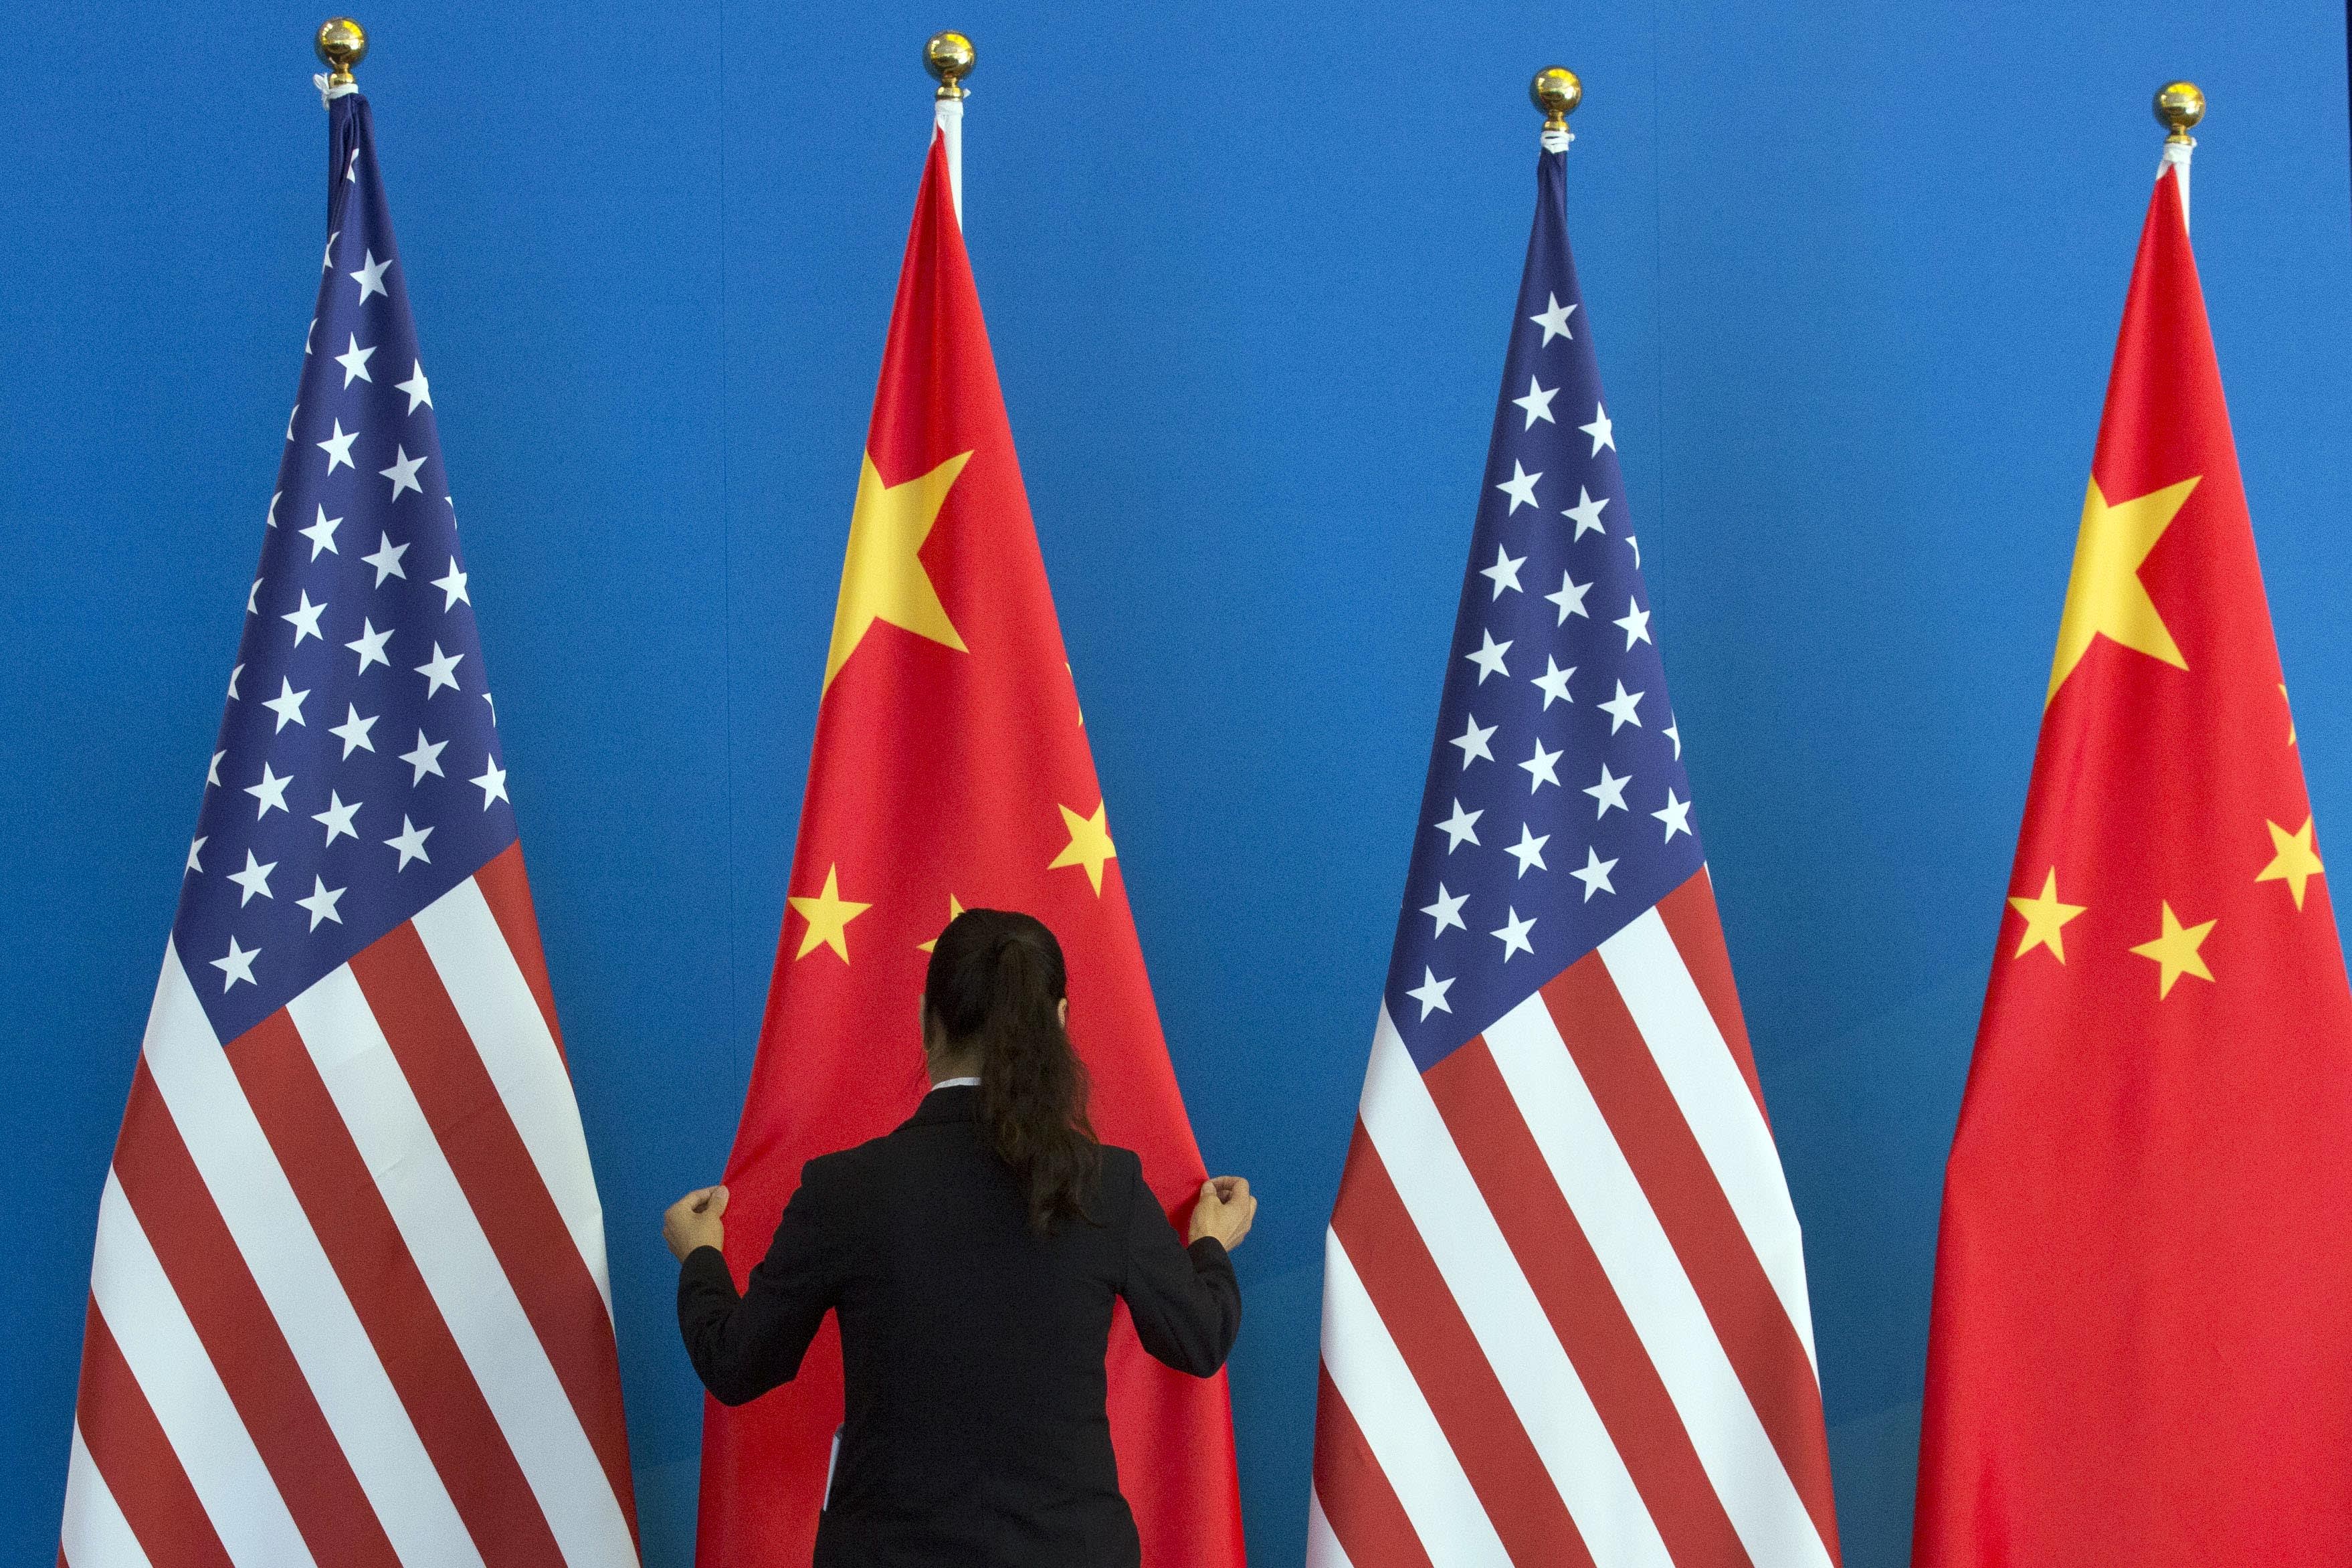 U.S.-China talks will be difficult, but reengagement is the right strategy, expert says